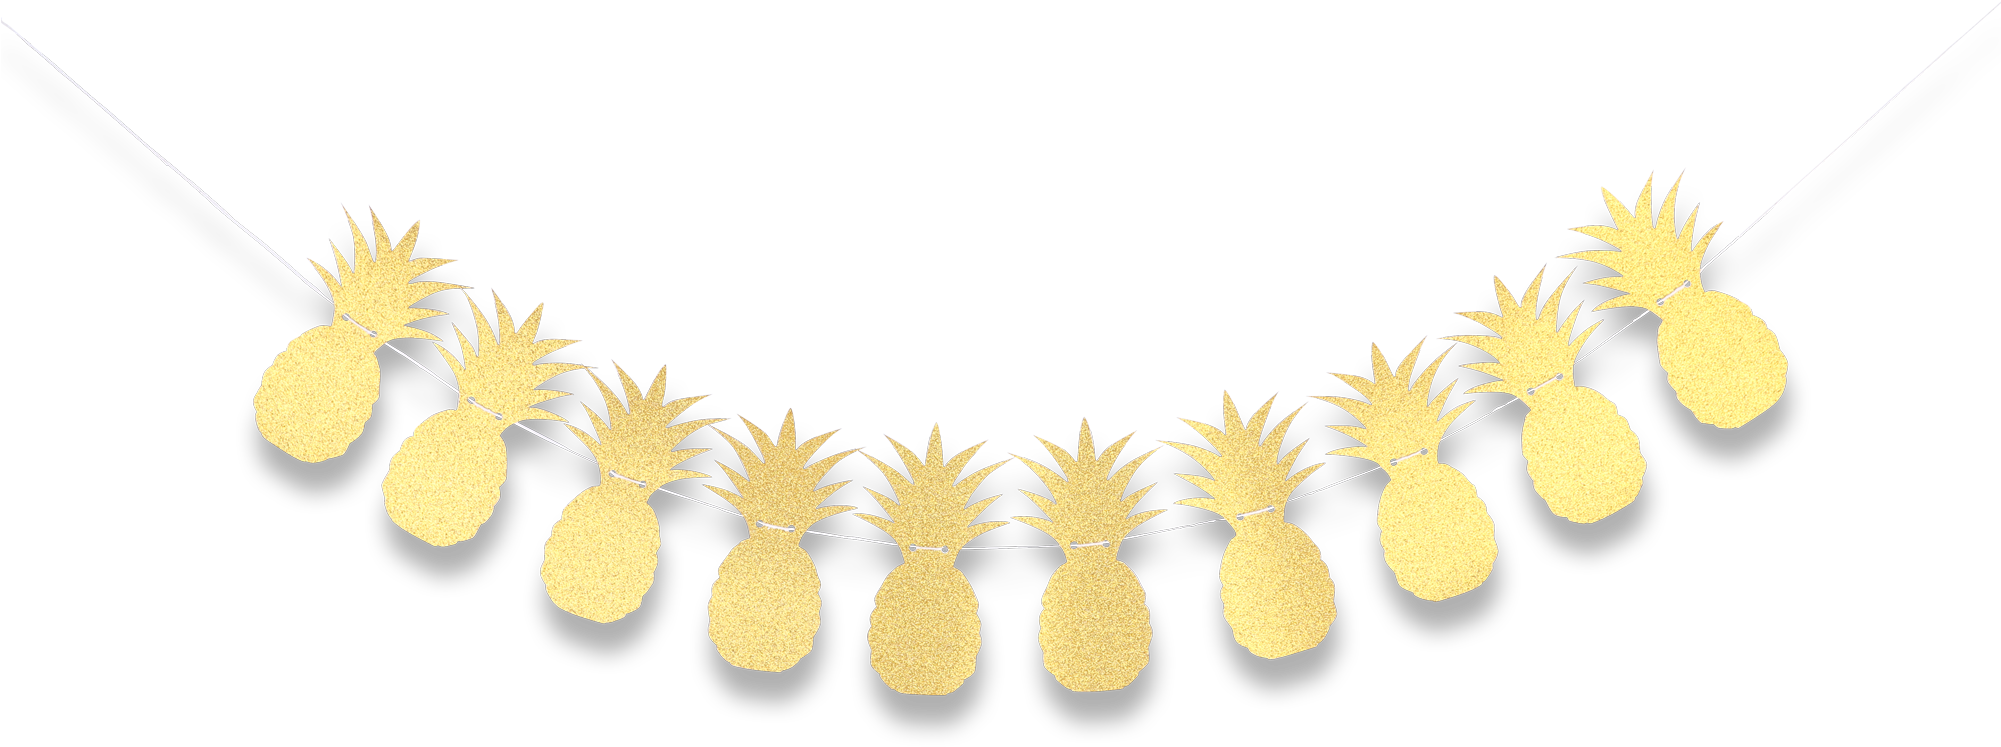 Gold Glitter Pineapple Garland - Transparent Image Buntings Gold (2000x2000), Png Download